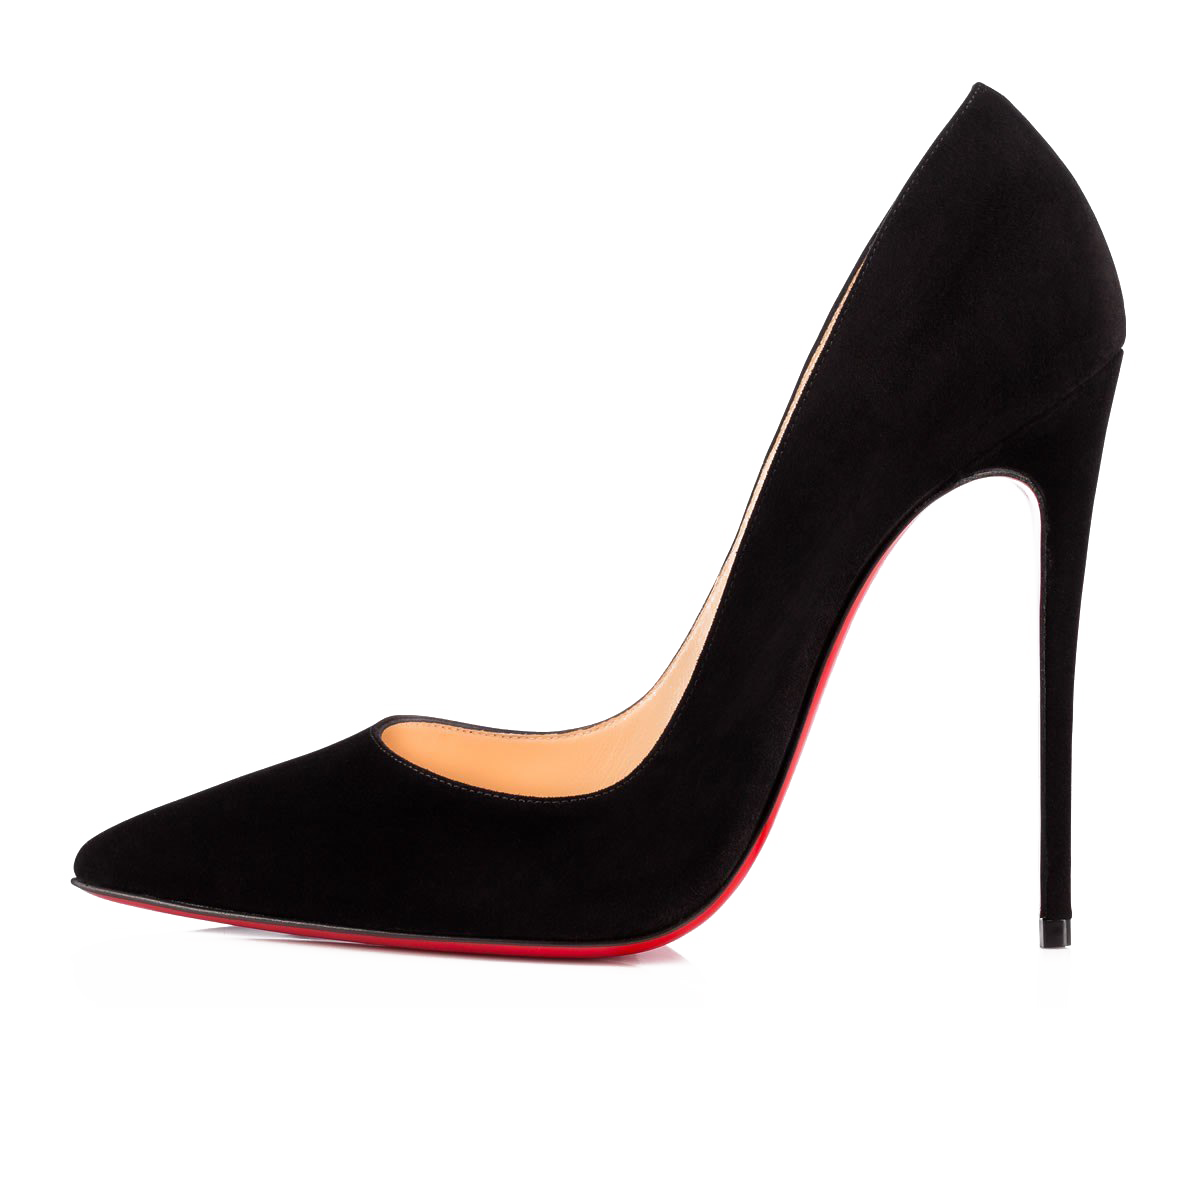 Louboutin Png Image Transparent Background Play